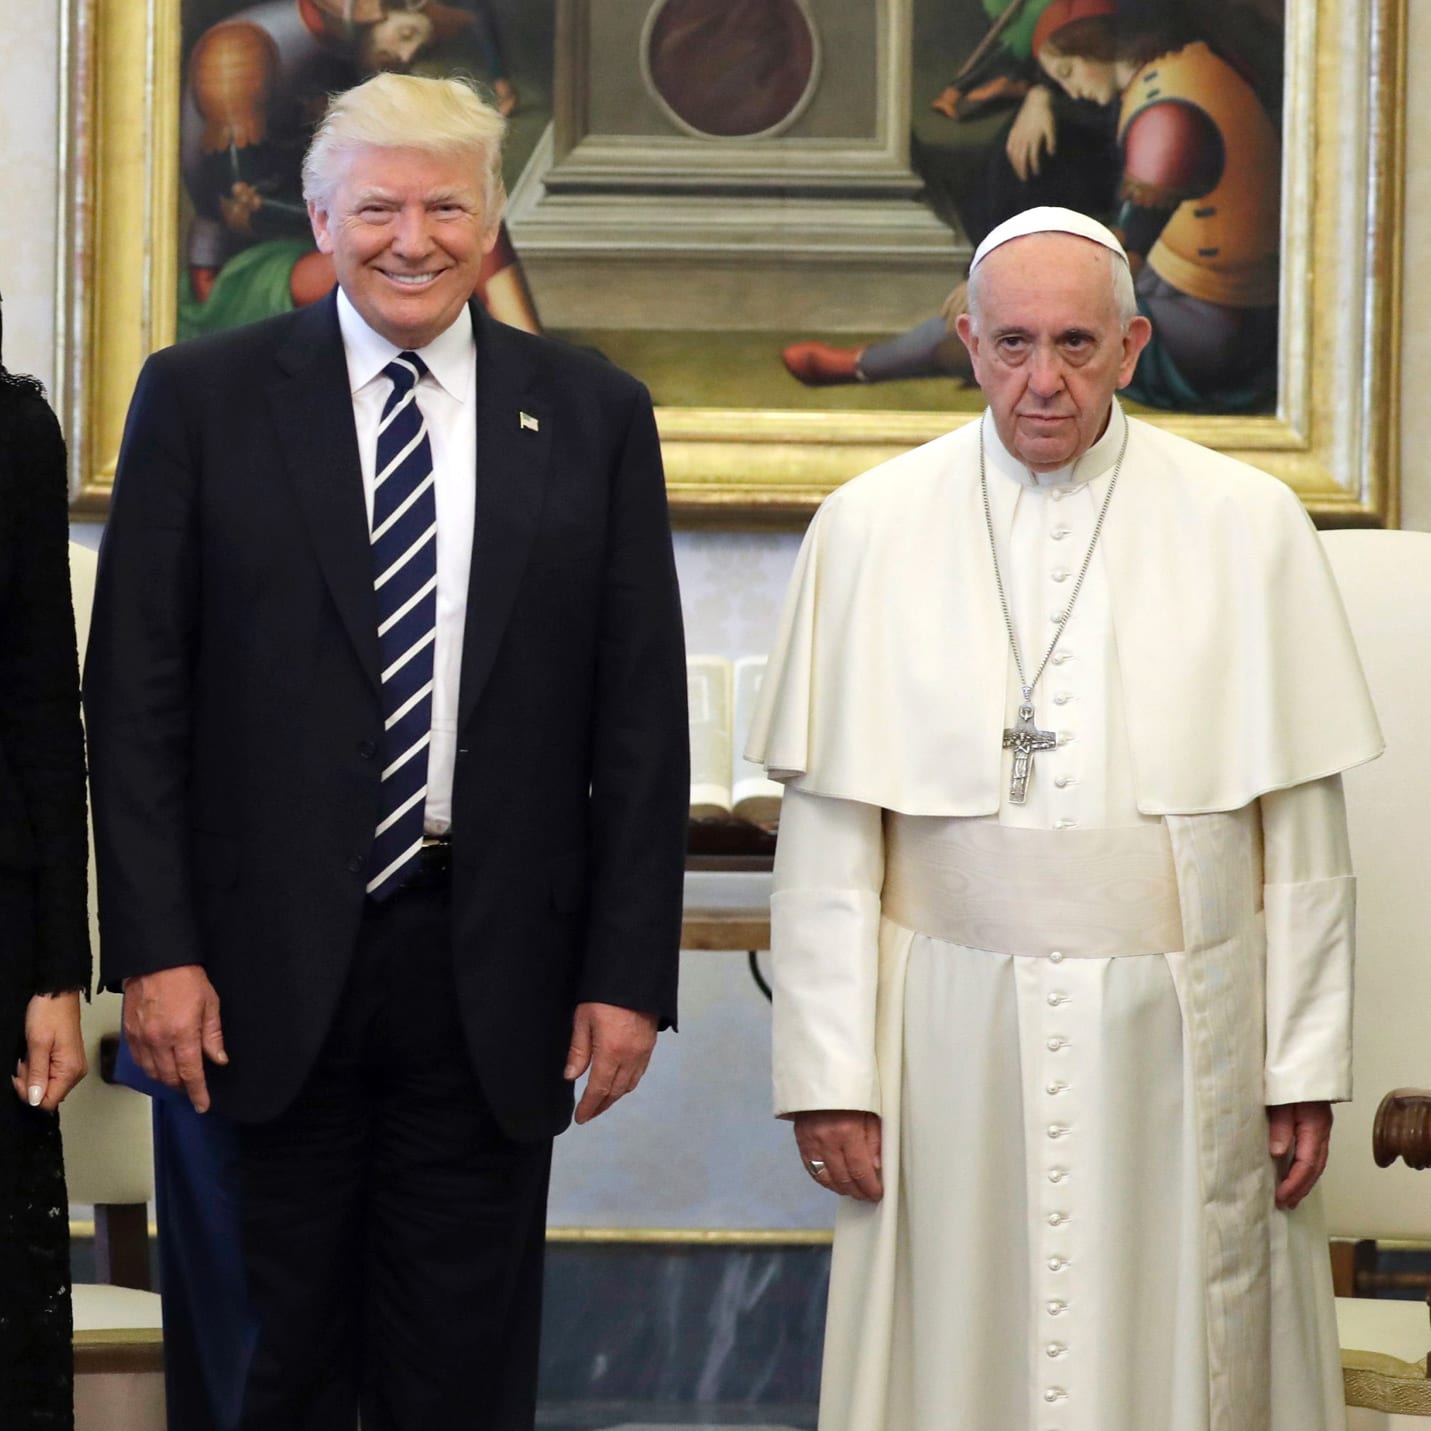 Trump to Pope Francis Vatican Meeting: I 'Won't Forget What You Said'